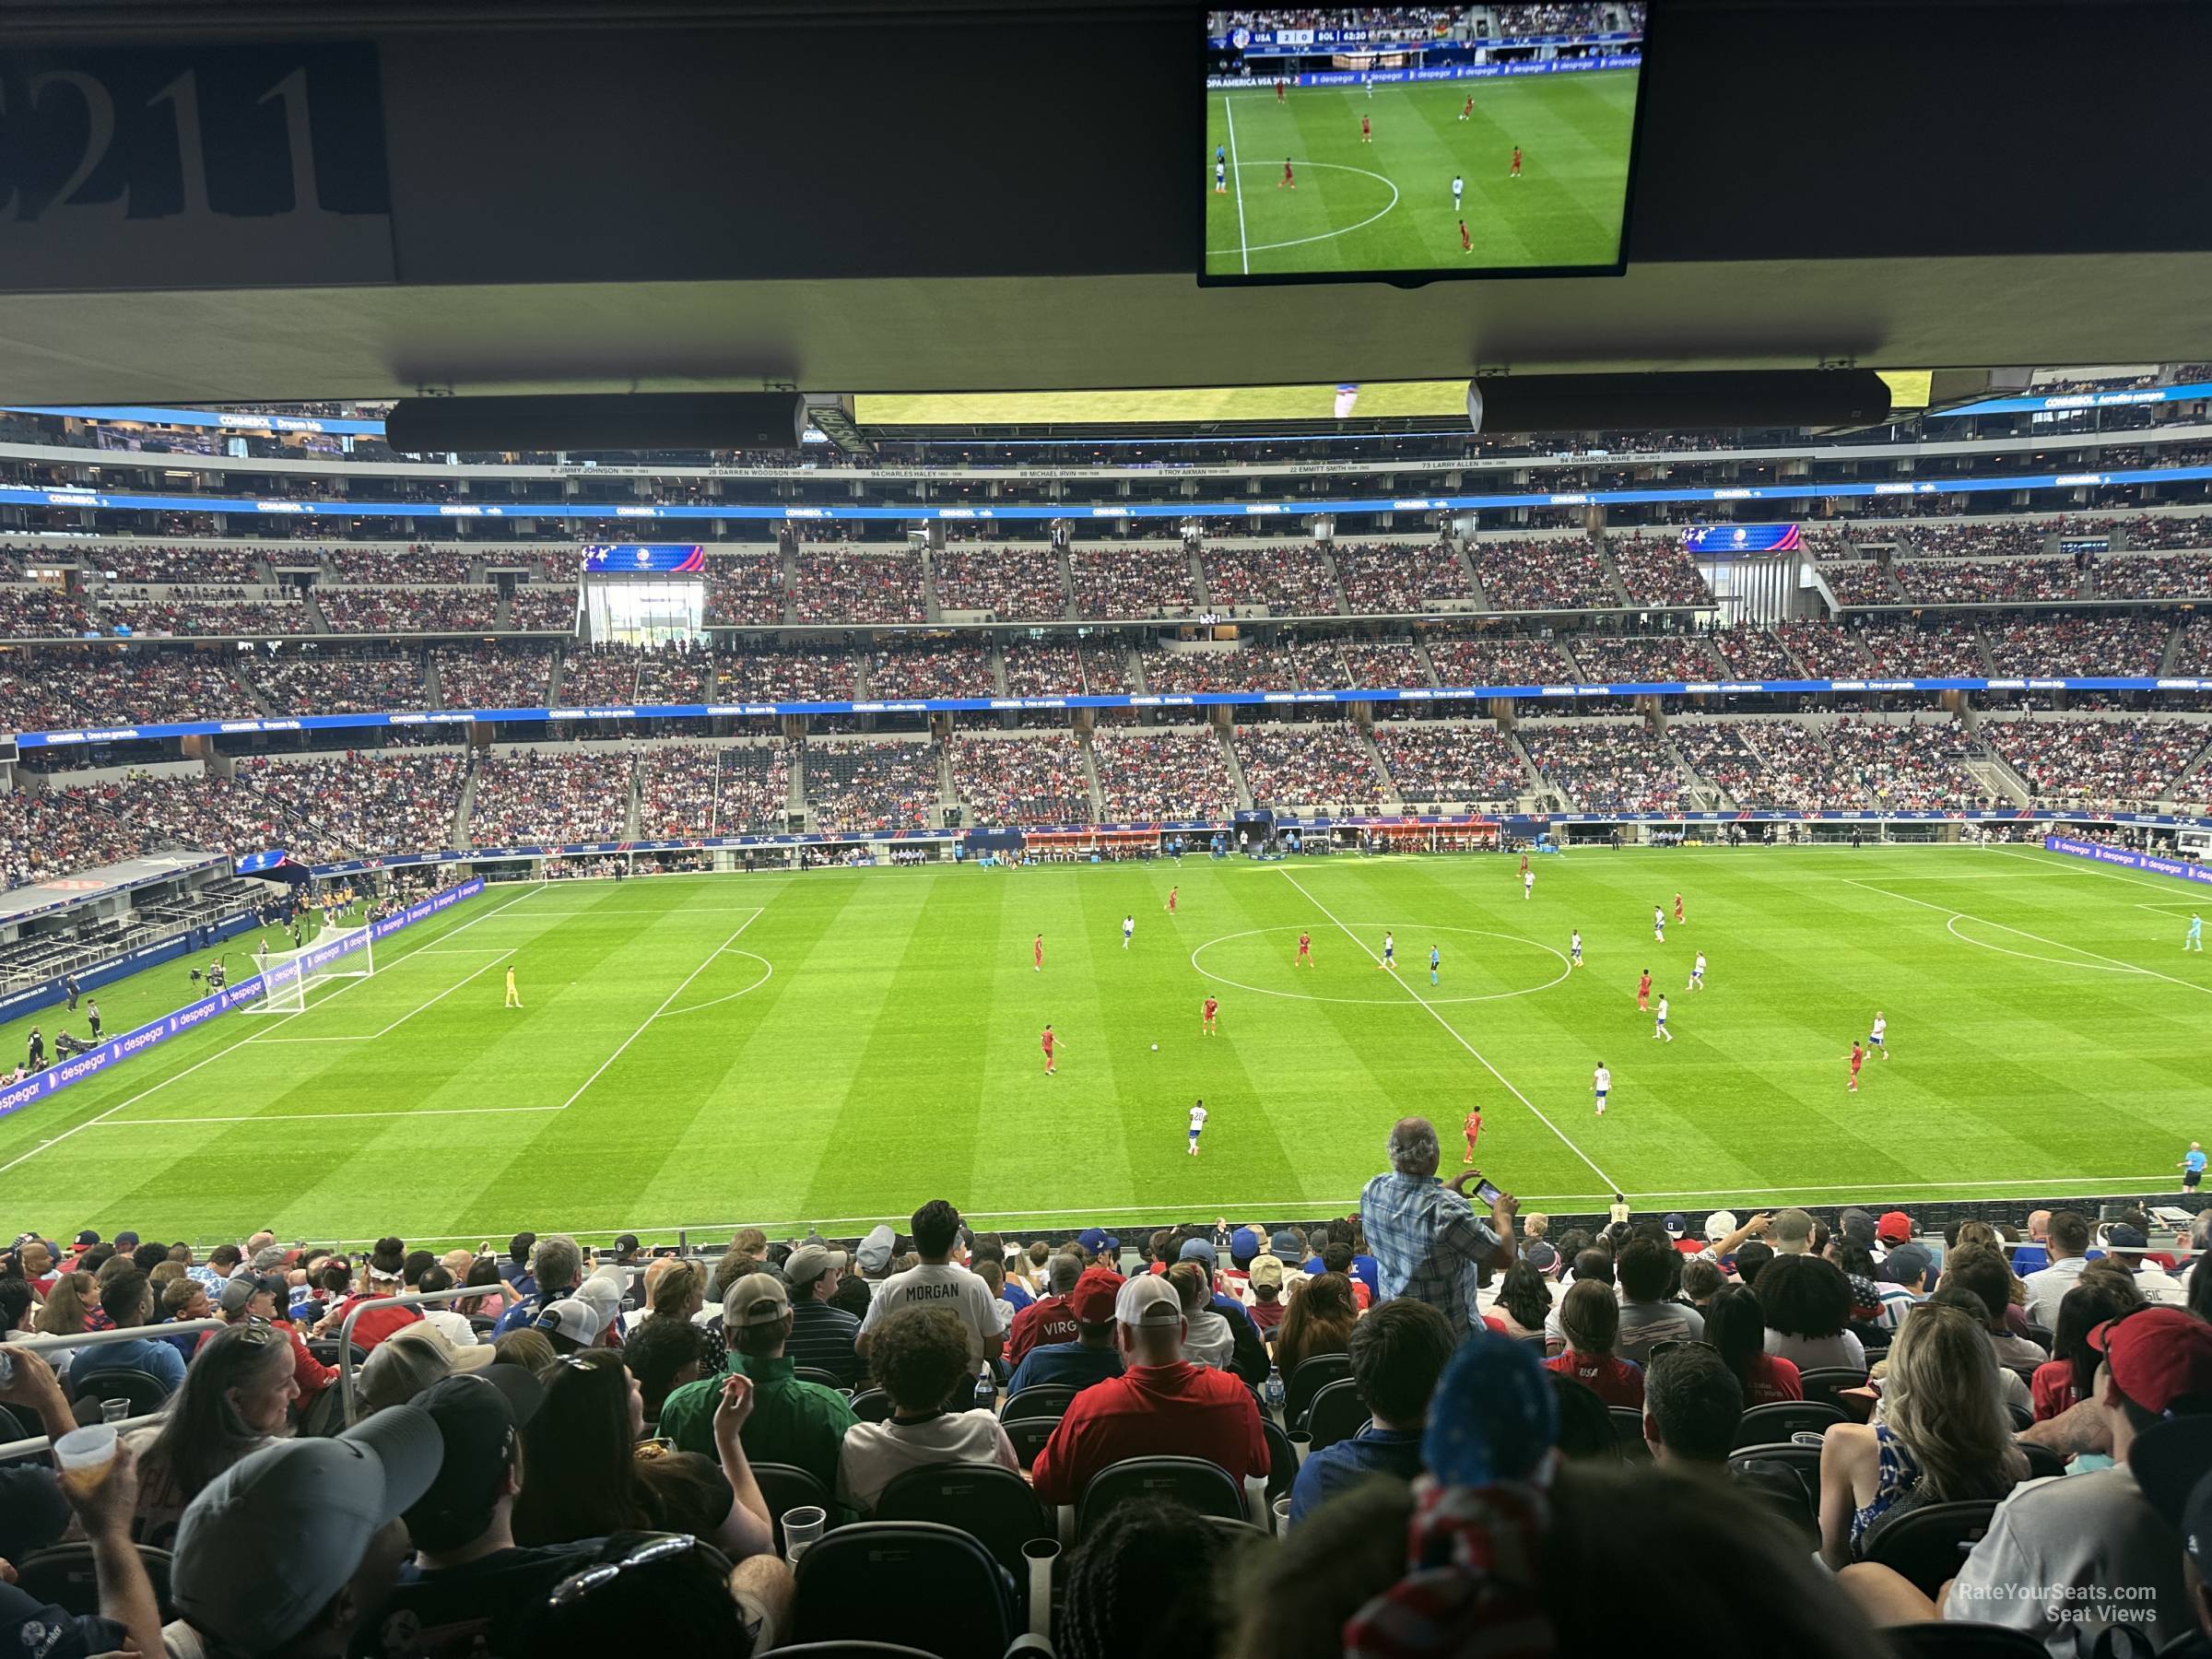 section c211, row 15 seat view  for soccer - at&t stadium (cowboys stadium)